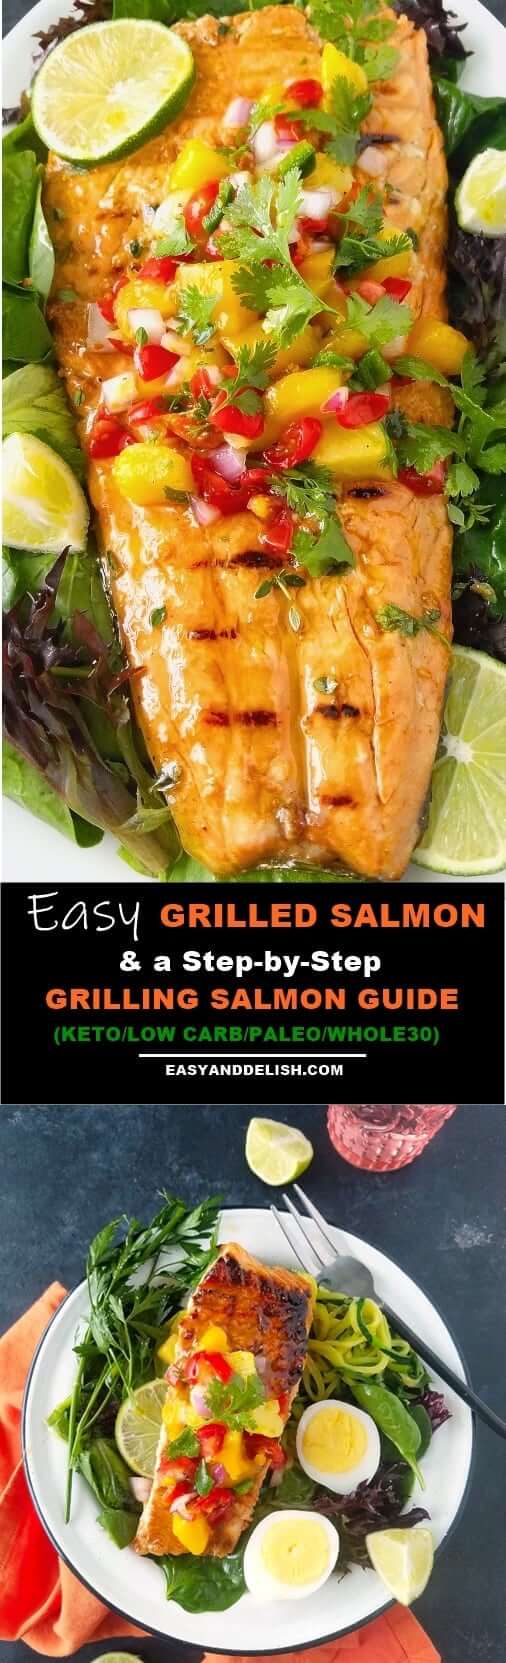 Easy Grilled Salmon - Easy and Delish